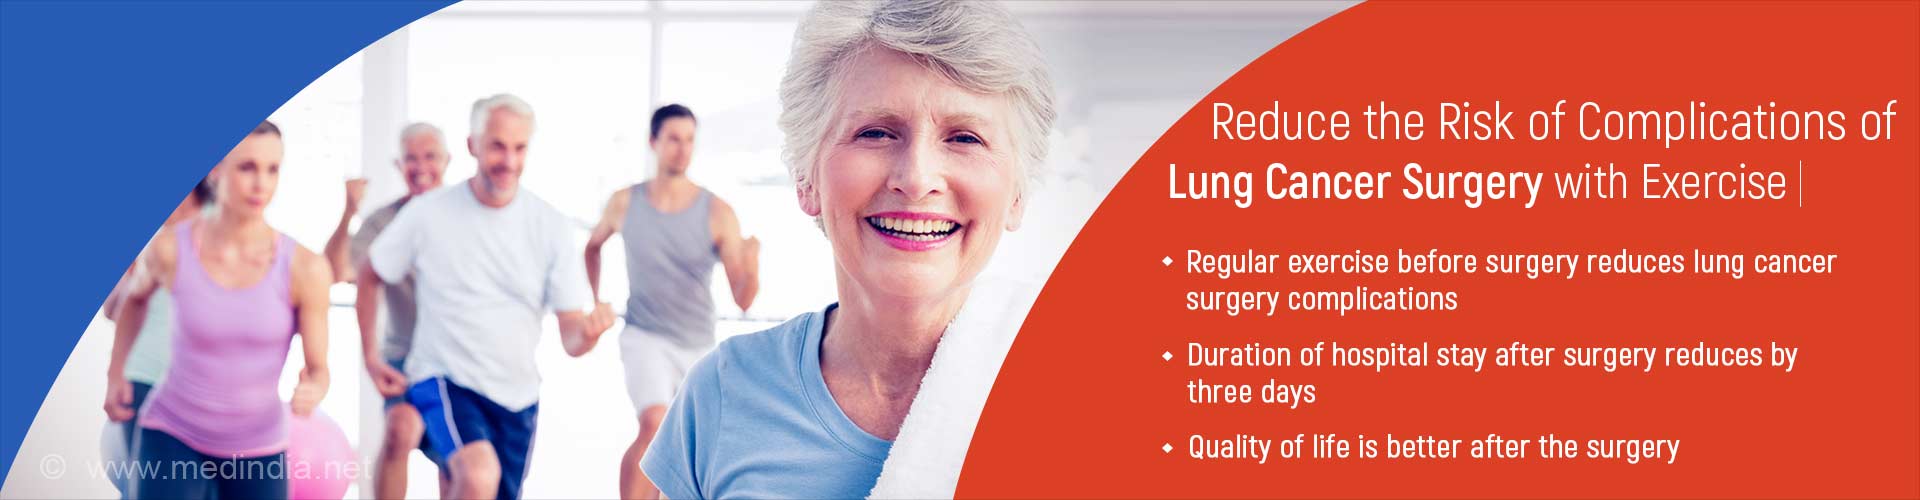 reduce the risk of complications of lung cancer surgery with exercise
- regular exercise before surgery reduces cancer surgery complications
- duration of hospital stay after surgery reduces by three days
- quality of life is better after surgery